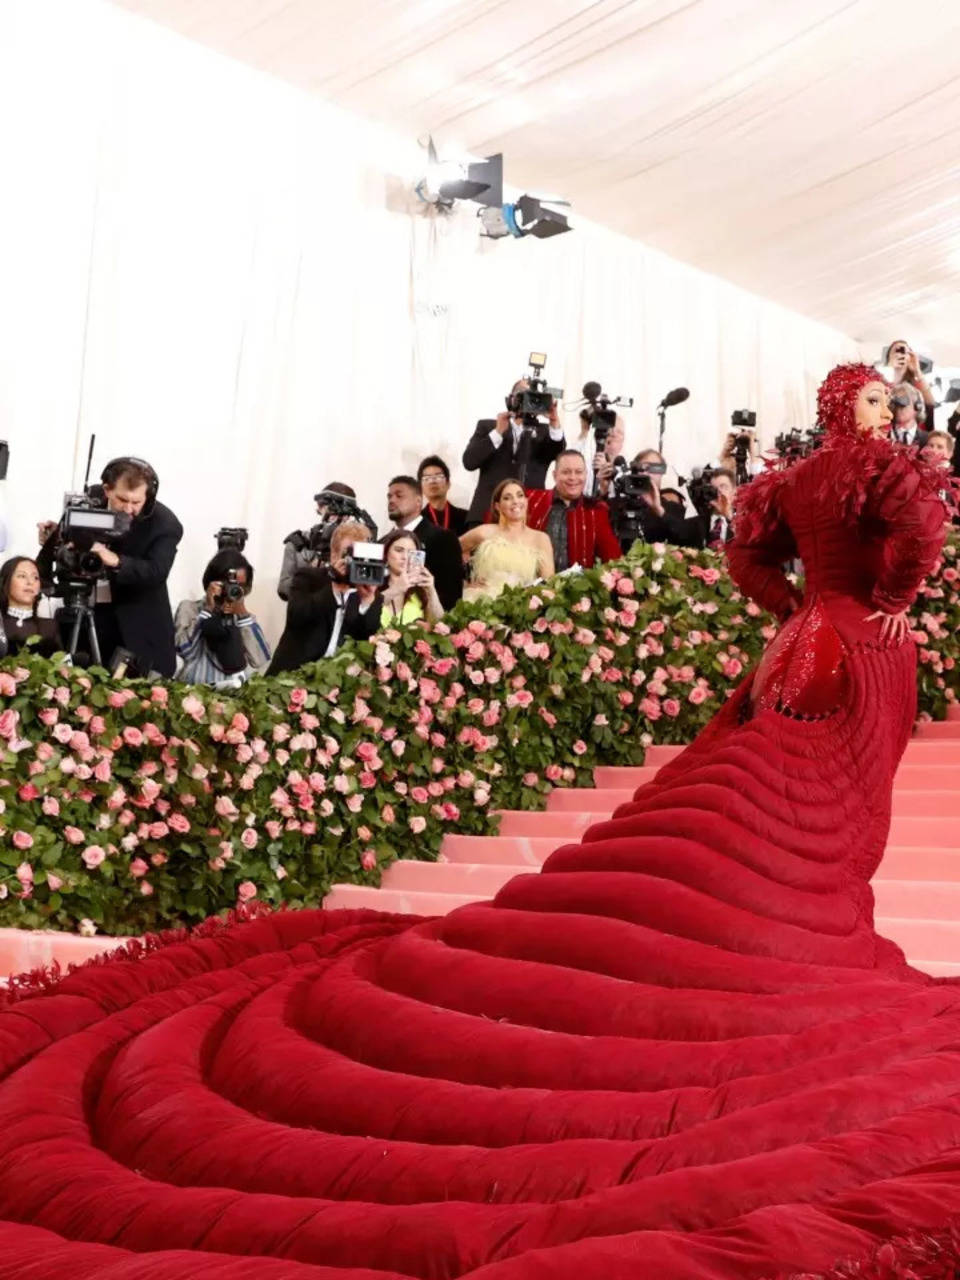 Met Gala 2023 Guest List Alia, Jimin And Other Celebs Expected To Walk The  Red Carpet